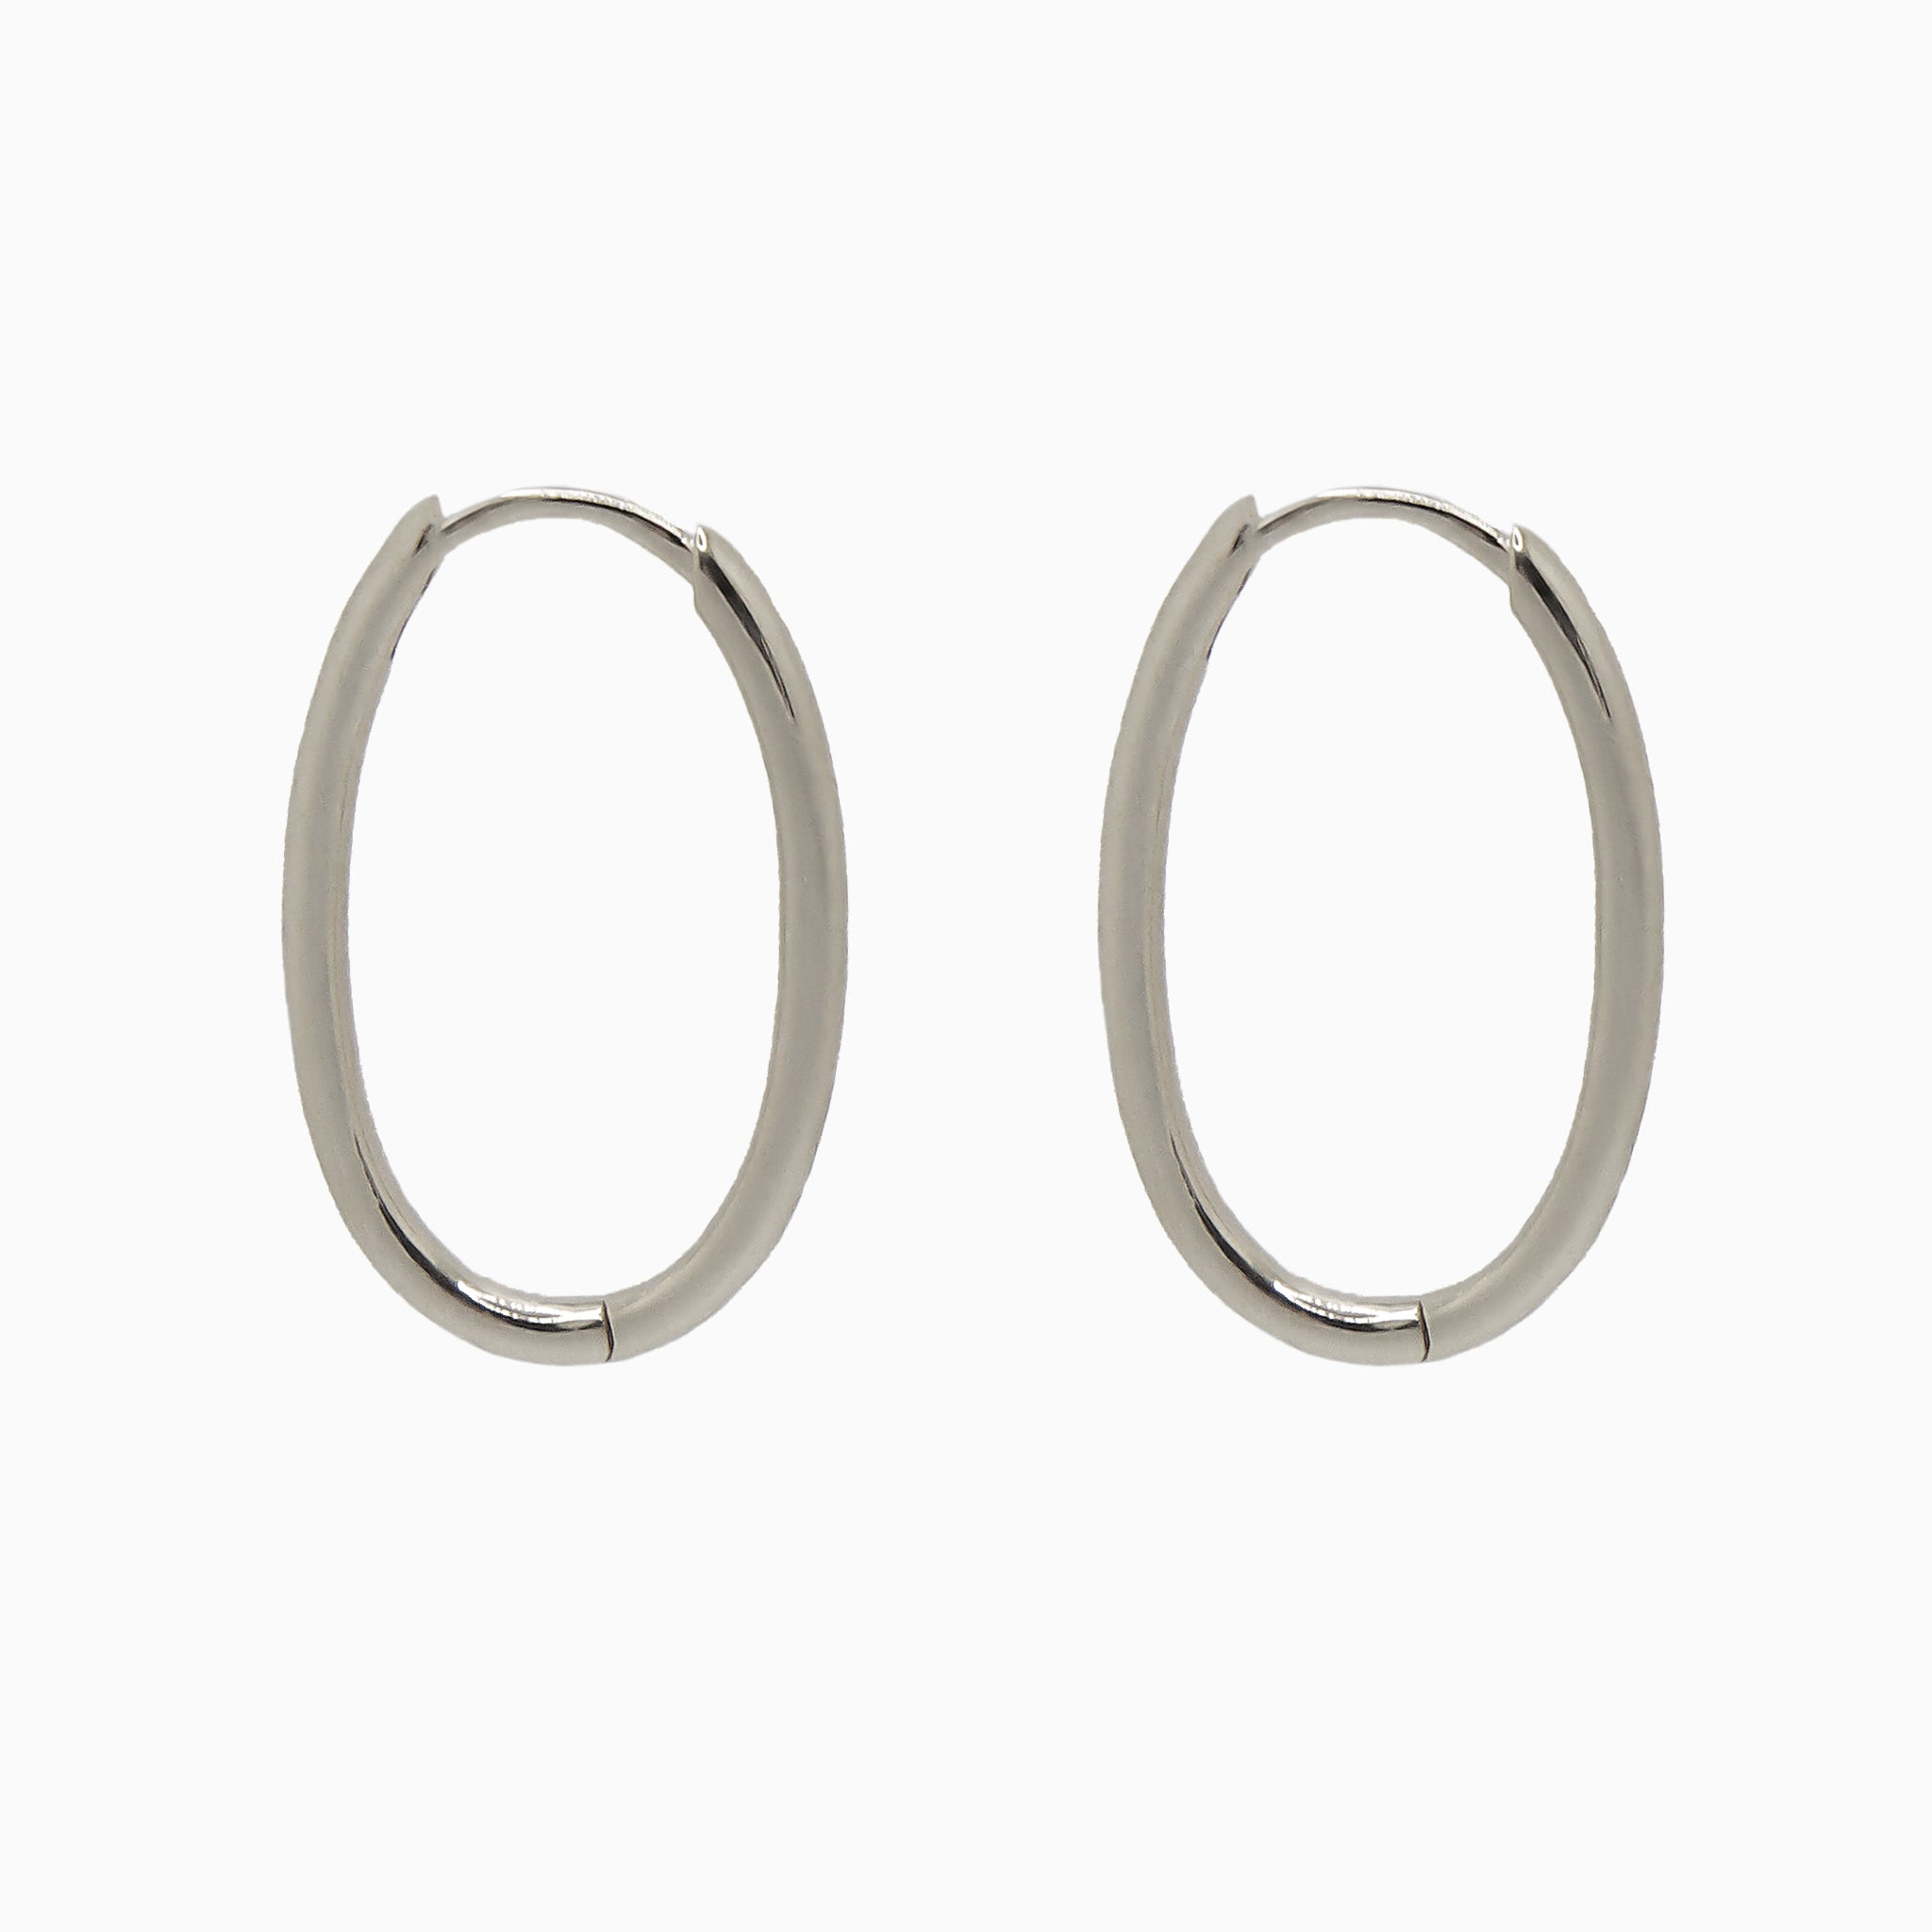 14k White Gold 21mm x 14mm Hinged Everyday Oval Hoop Earrings, Side View